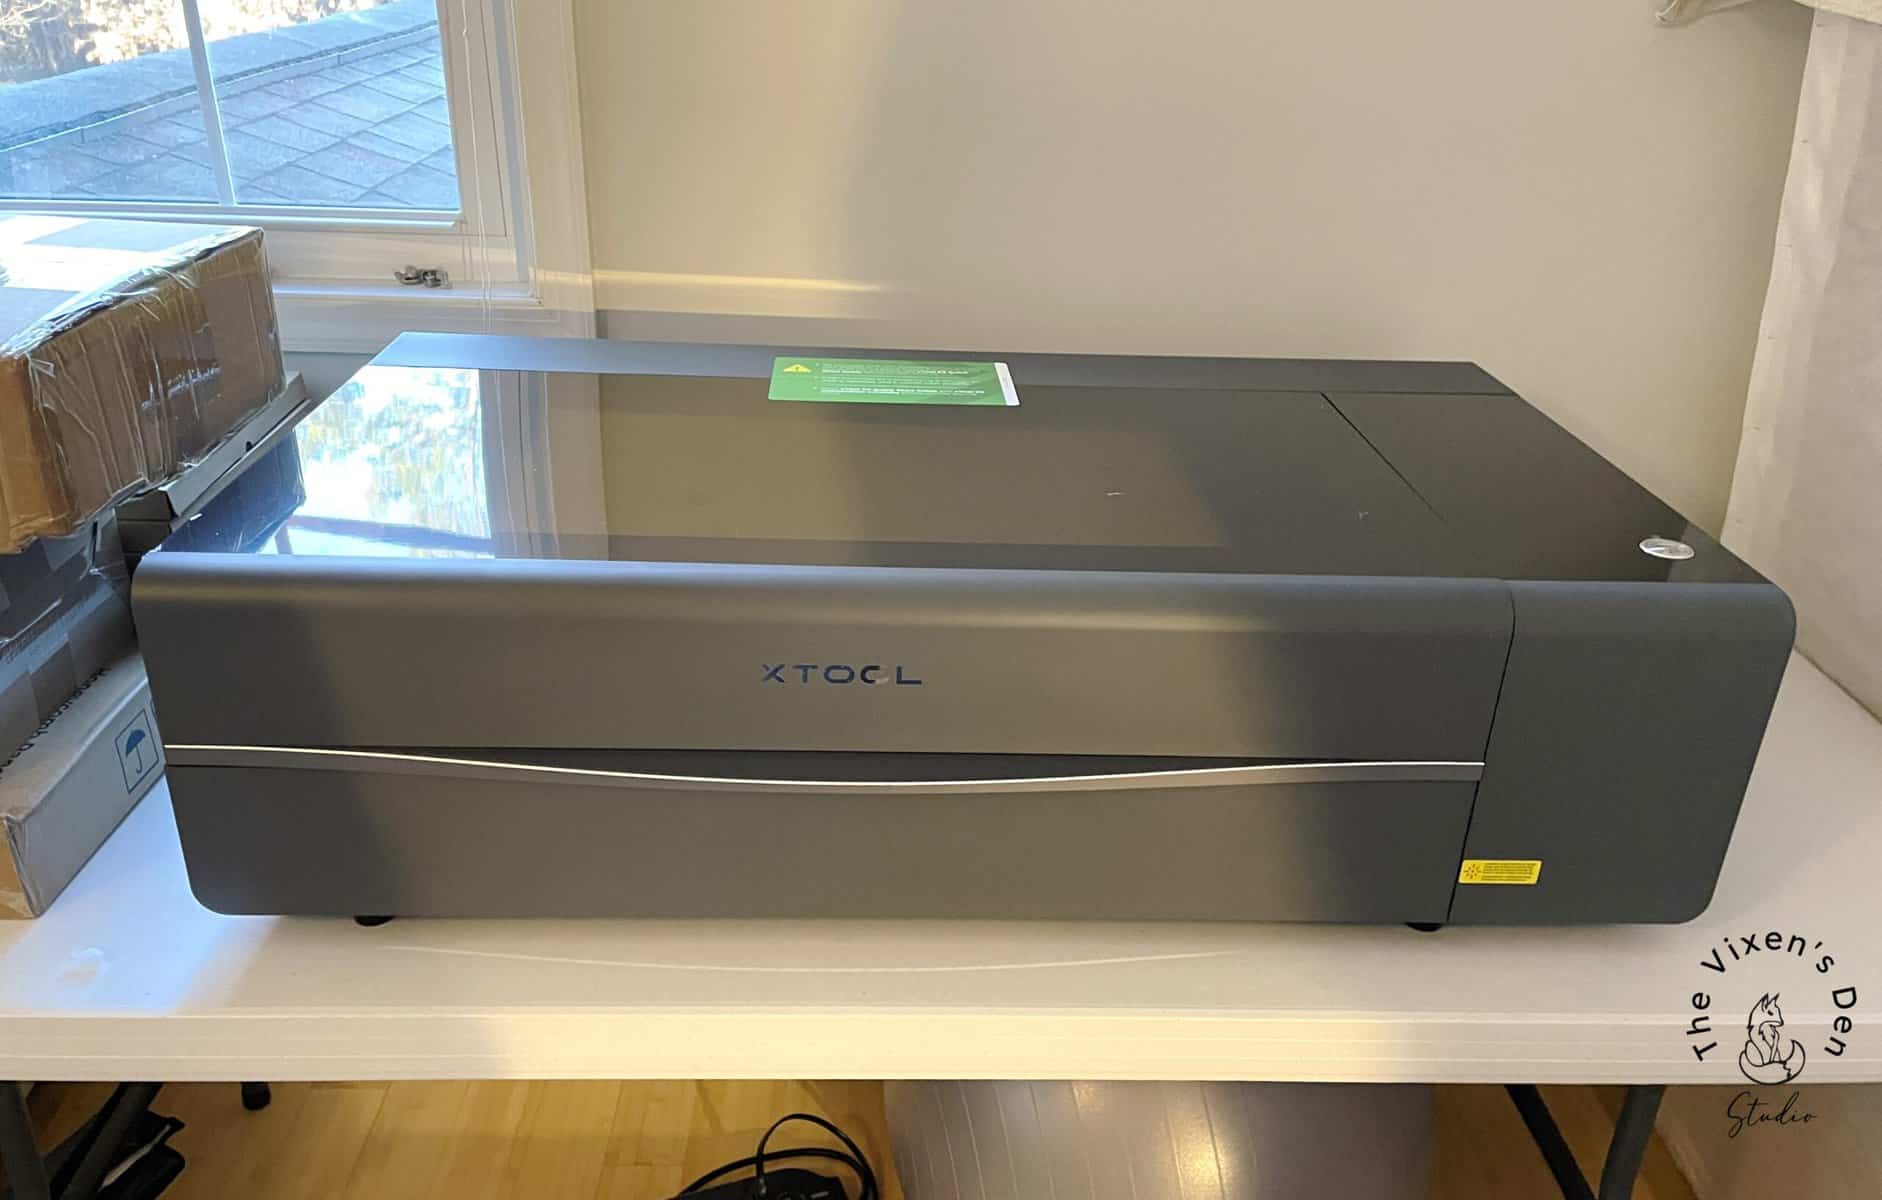 A laser printer sitting on a table in a room.